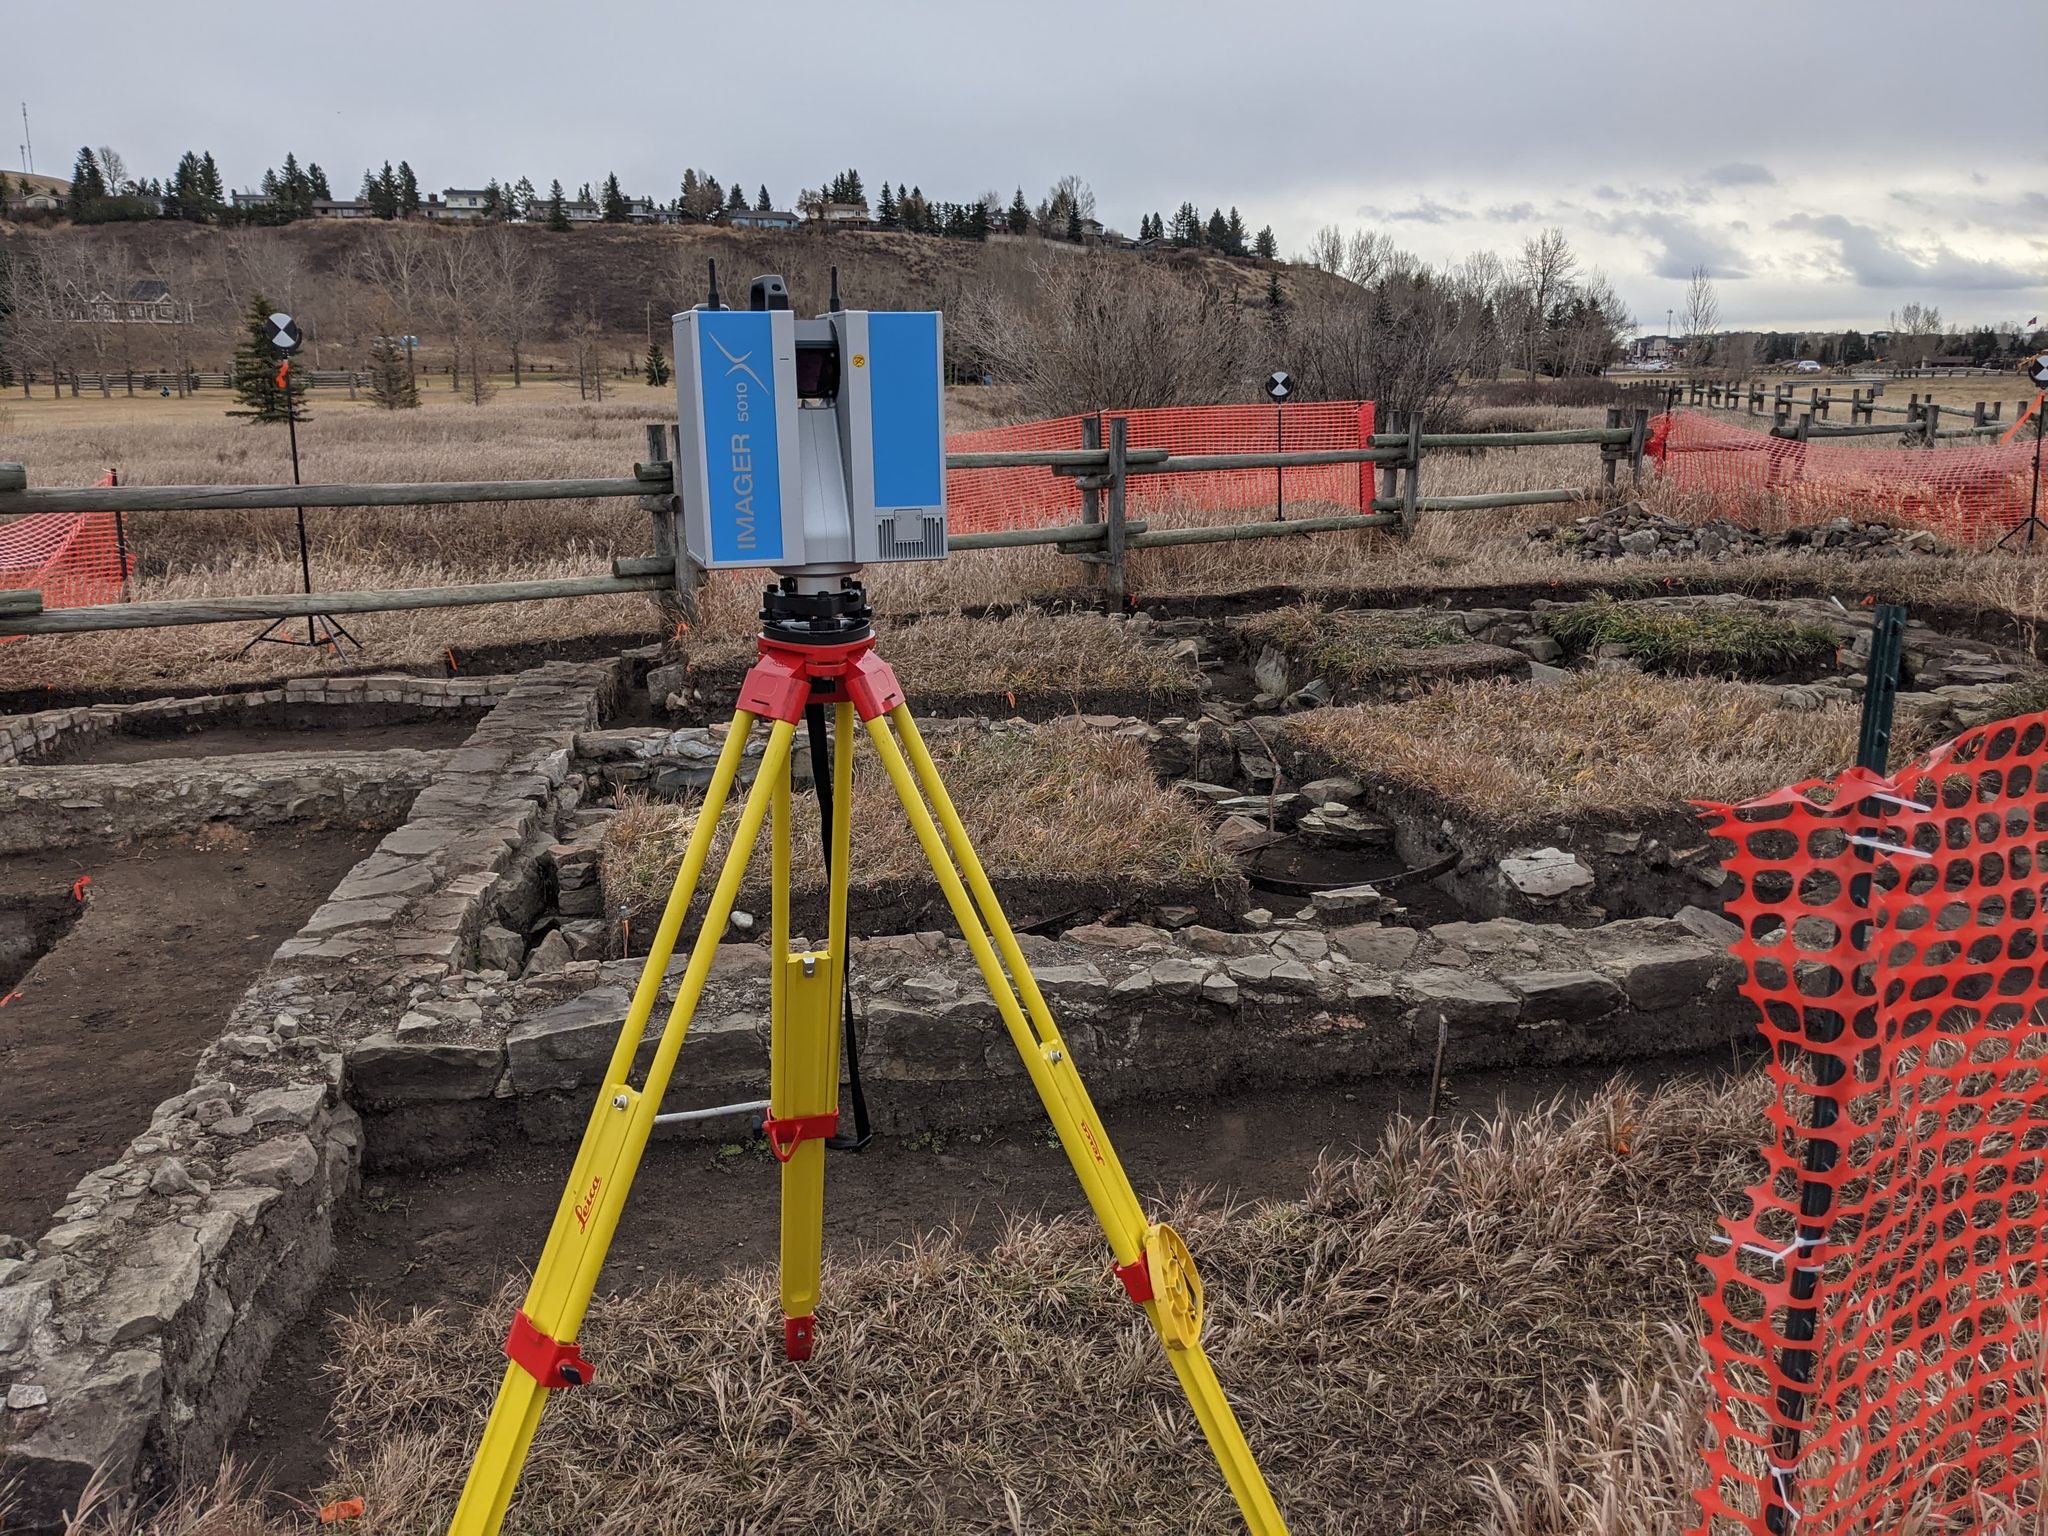 Scanning with the Z+F 5010X at the Cochrane Ranche, November 2020.